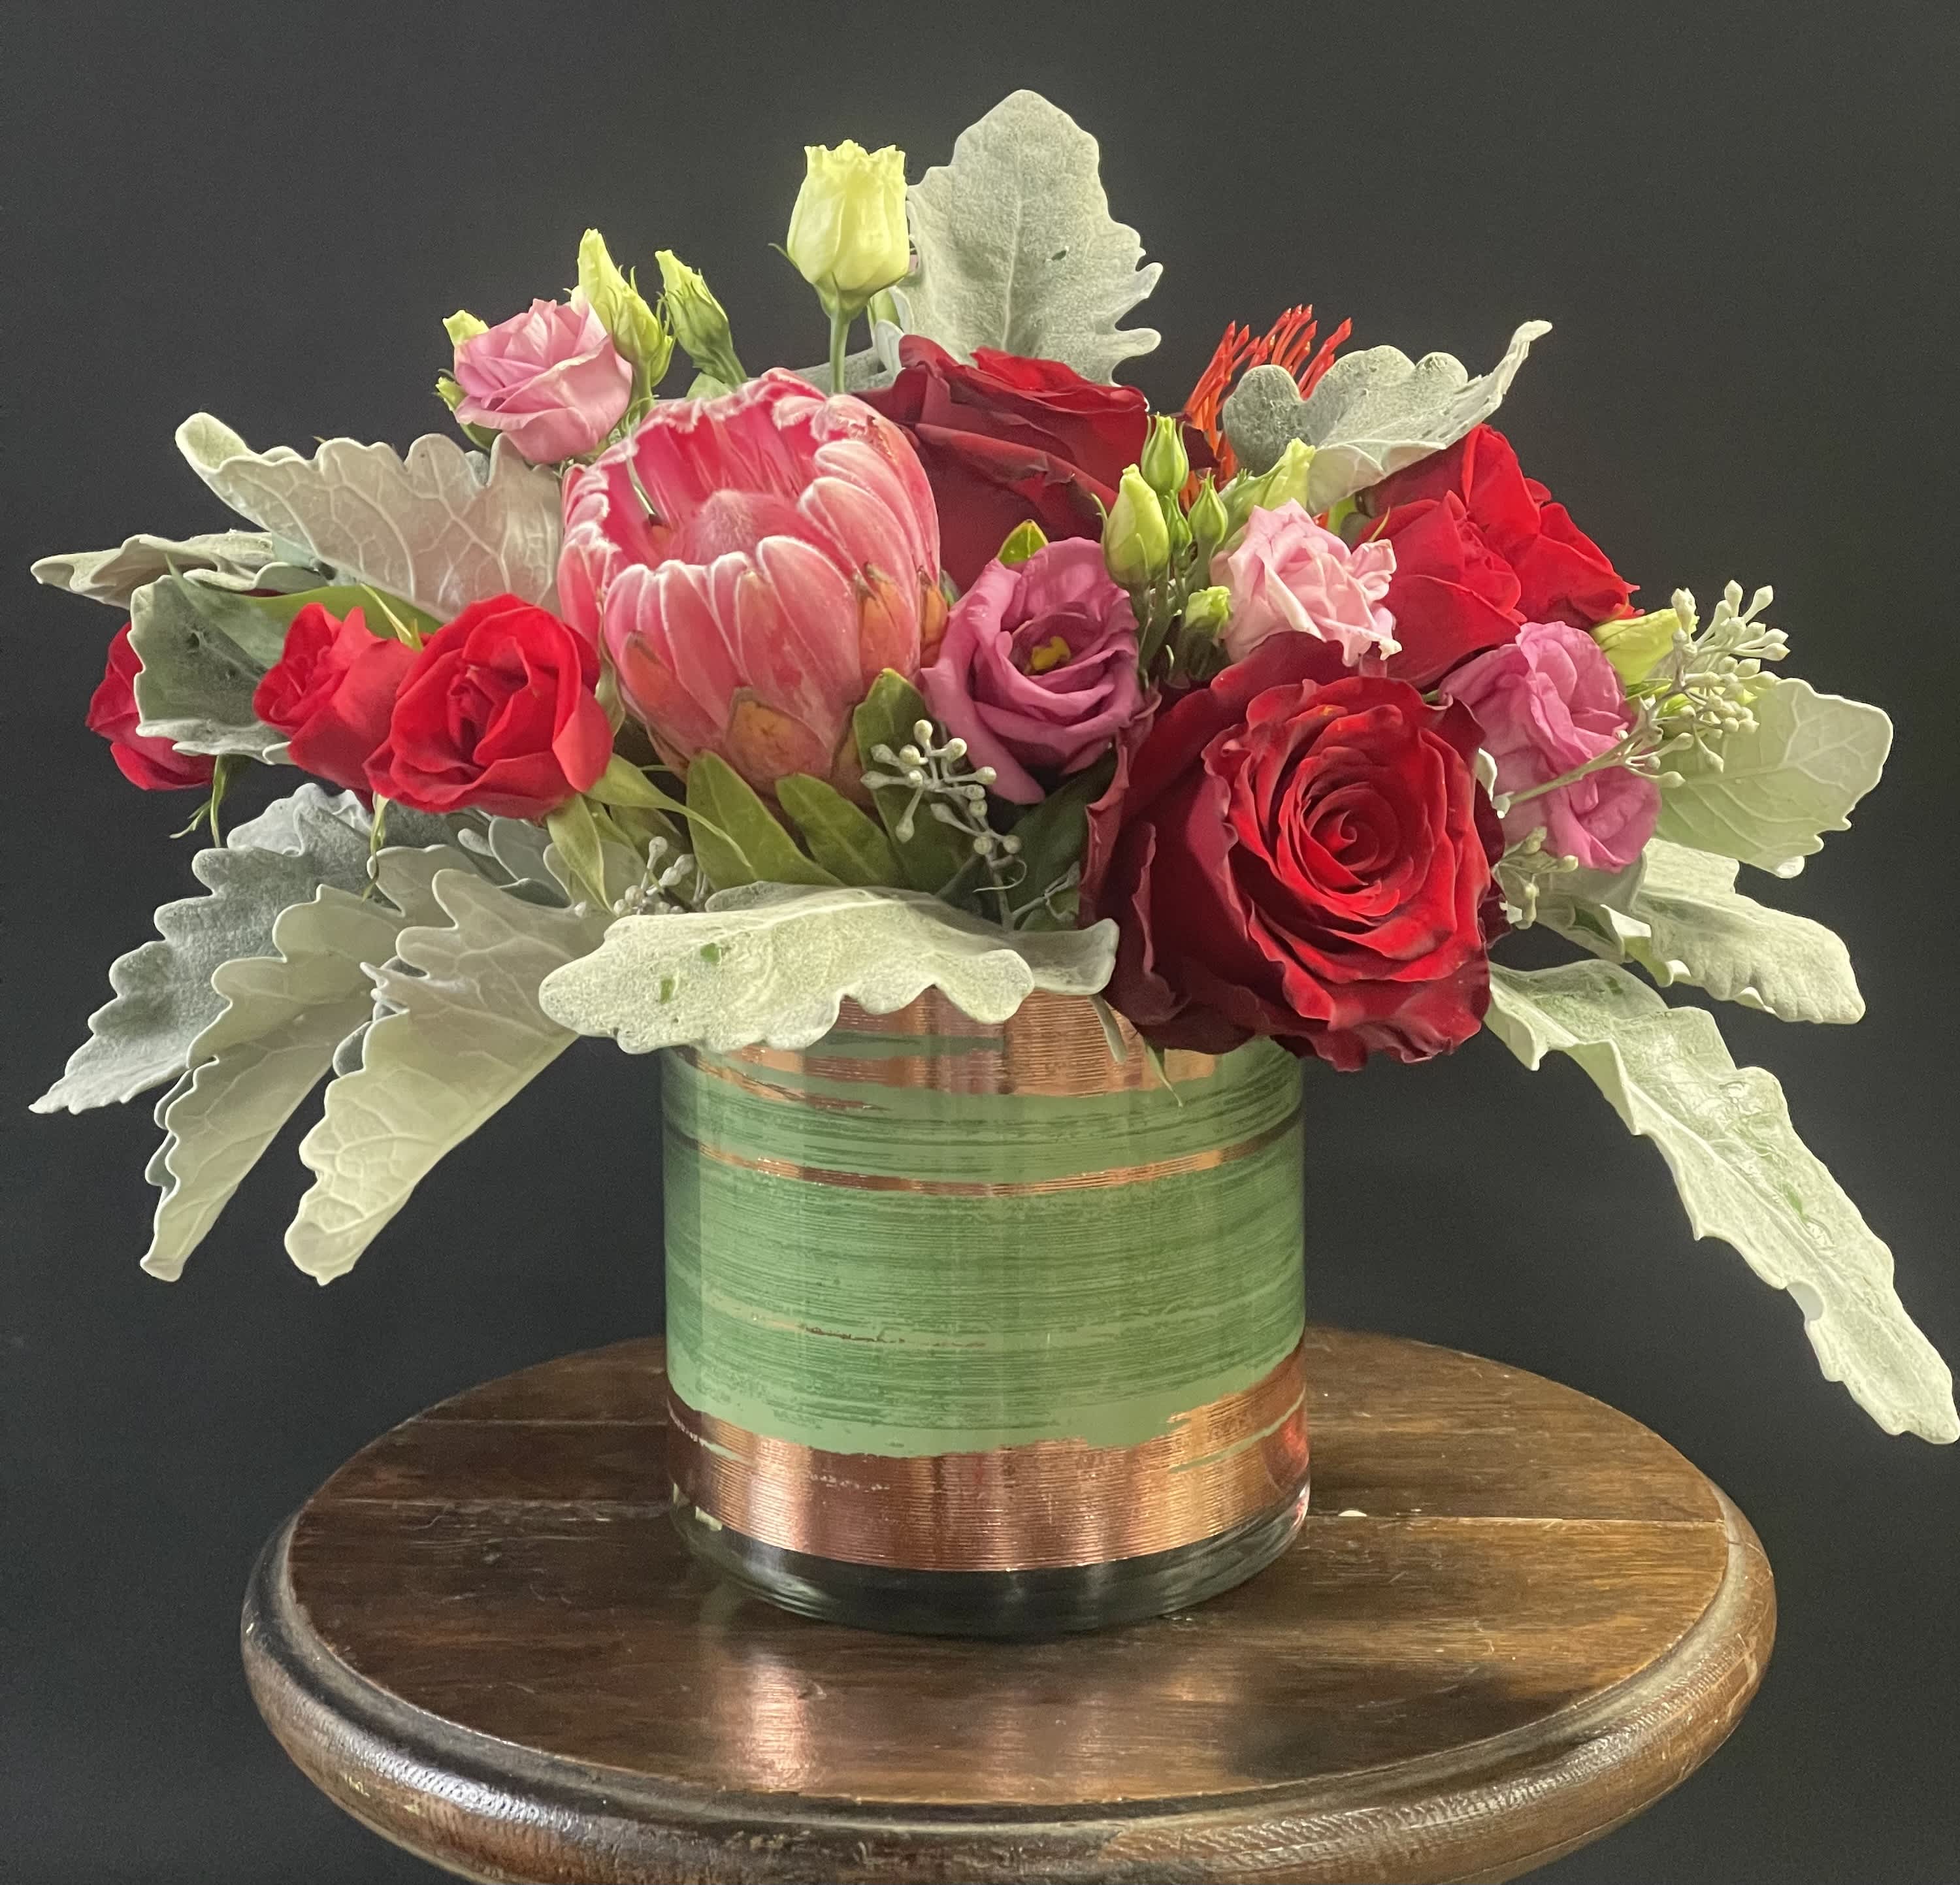 Tropical Expression Bouquet  - A compact design with tropical blooms like protea, pin cushion, or ginger.  Nestled among them are other blooms like roses, spray roses, and lisianthus.  Tropical flowers may vary depending on availability.